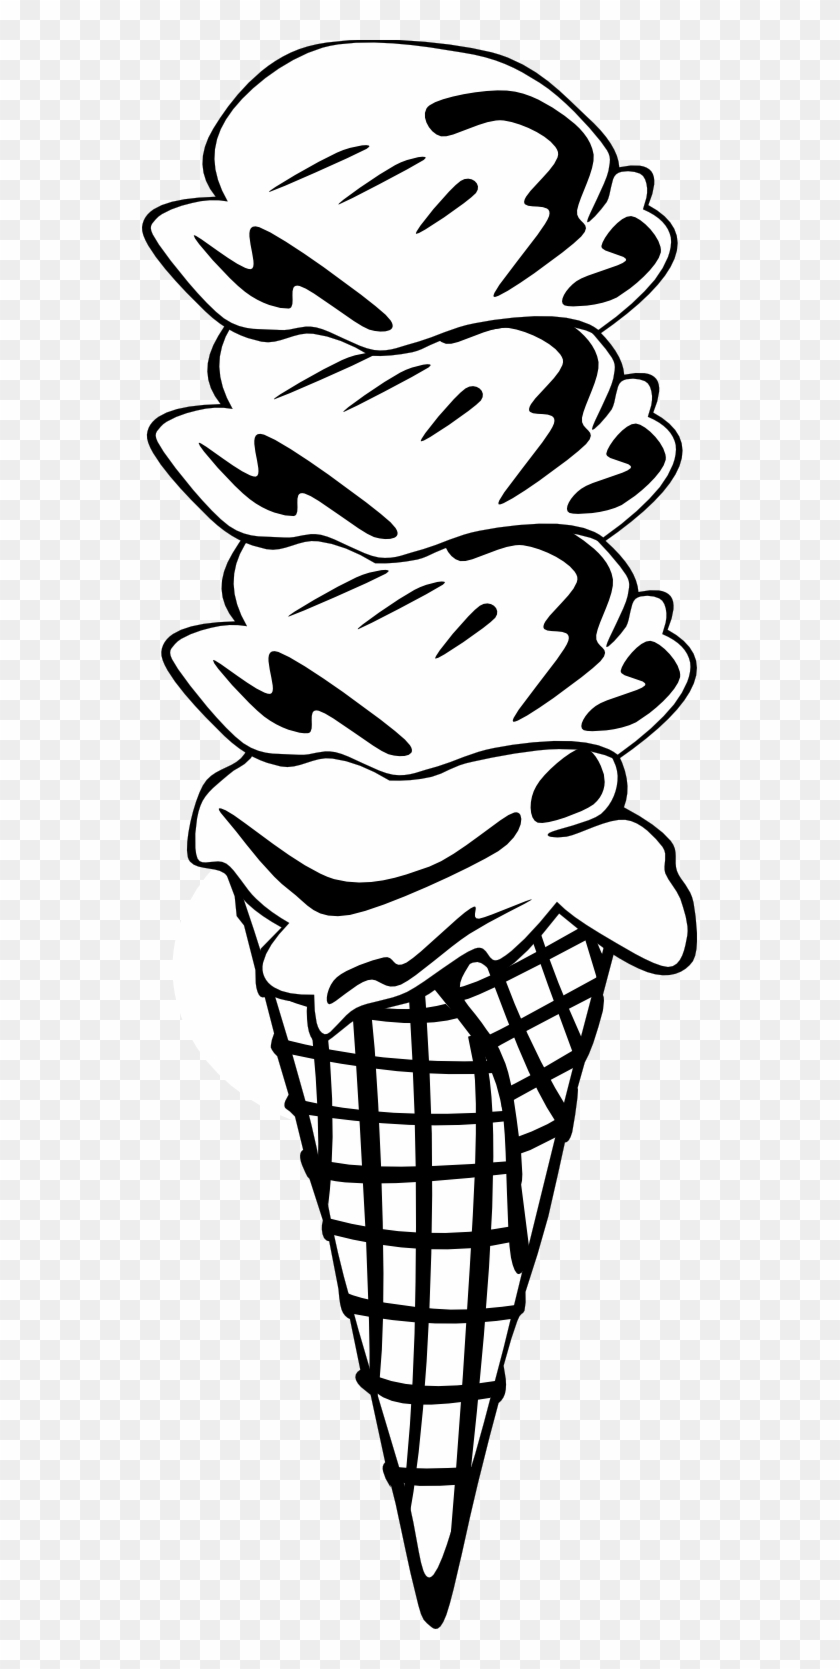 Png Royalty Free Stock Black And White Ice Cream Cone - Ice Cream Cone Clip Art Transparent Png